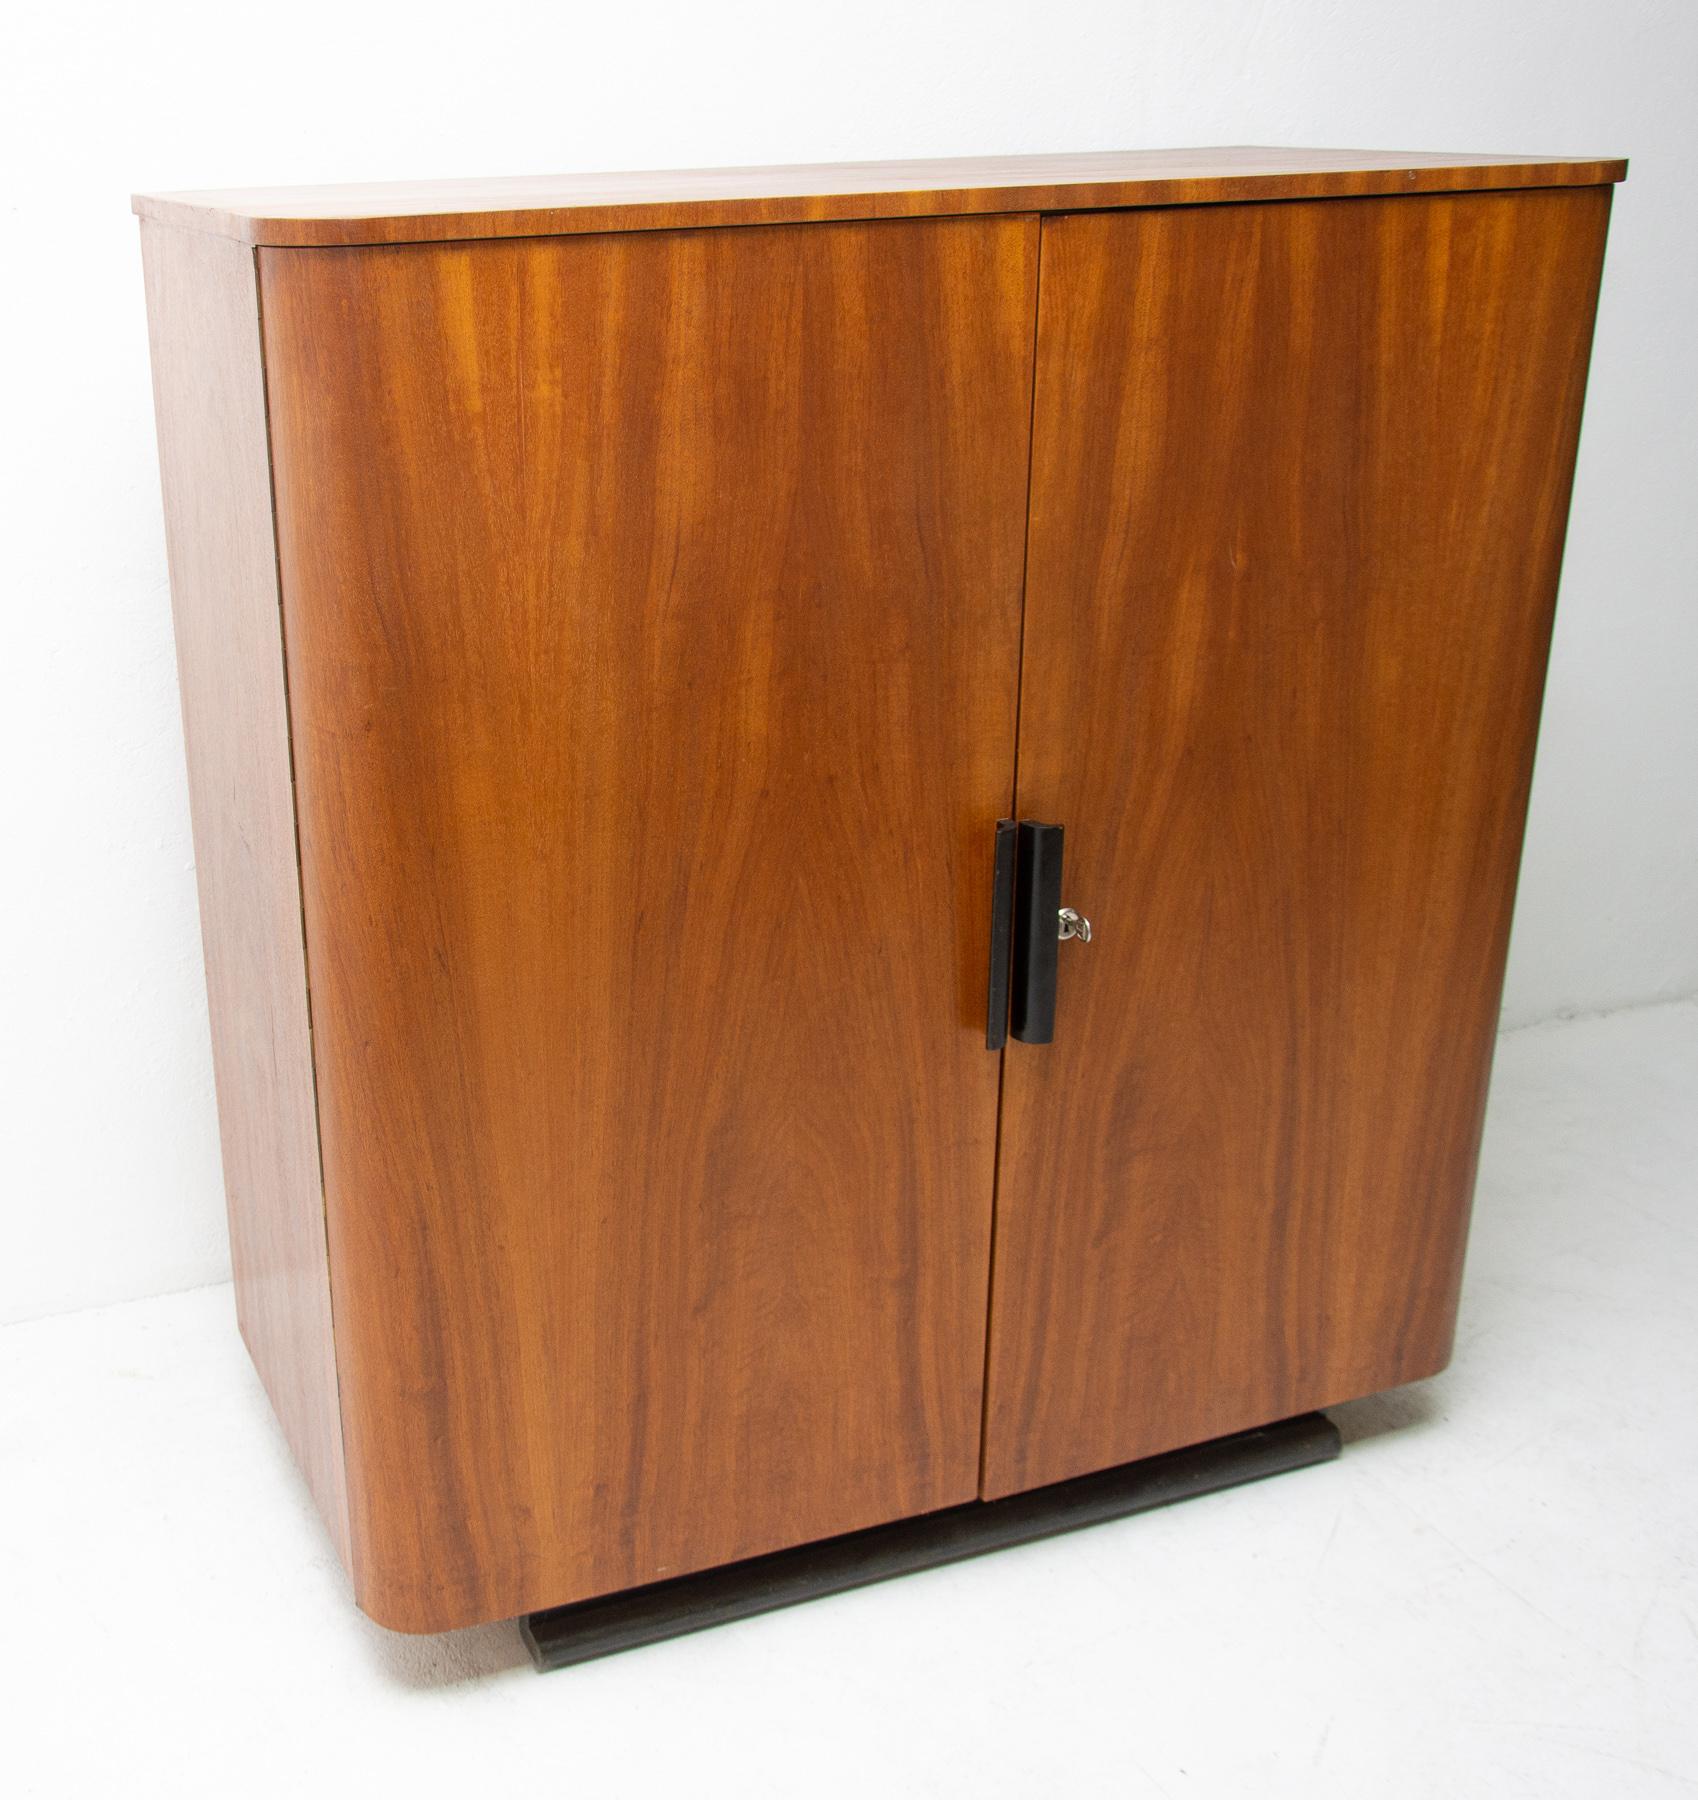 Wood Art Deco or Functionalist Cabinet Designed by Jindřich Halabala for UP Závody